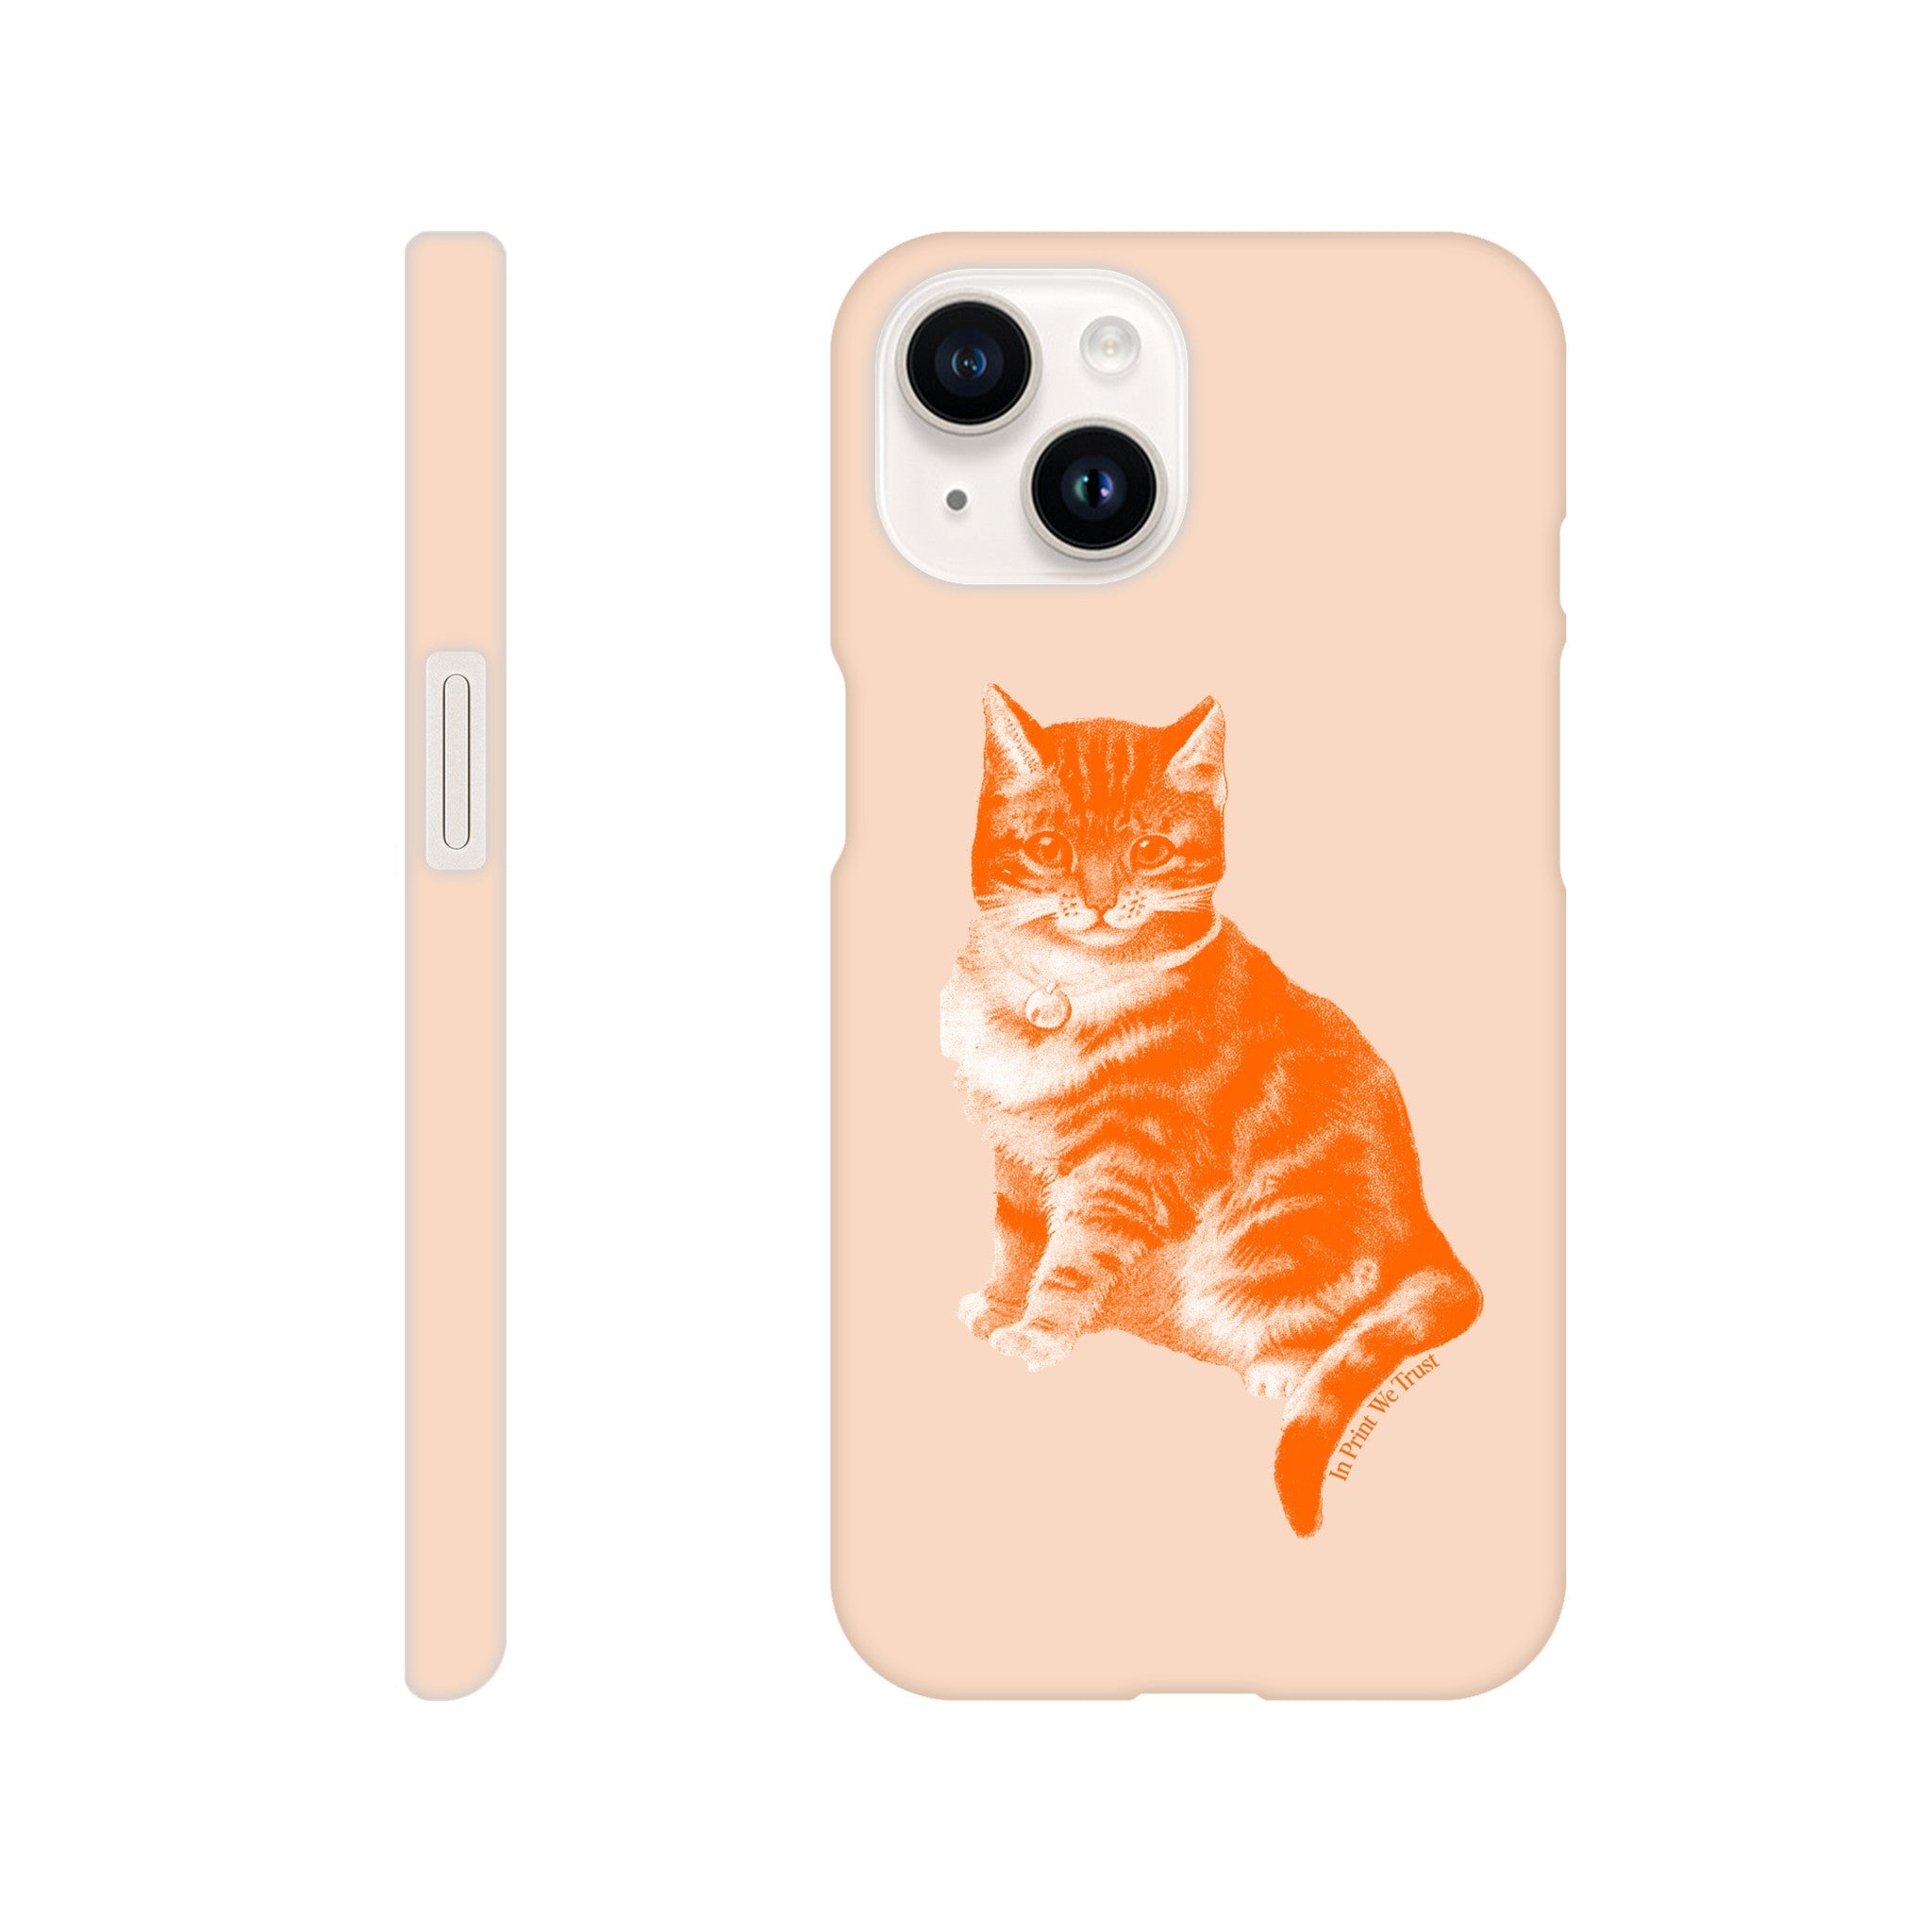 'Kitty' phone case - In Print We Trust